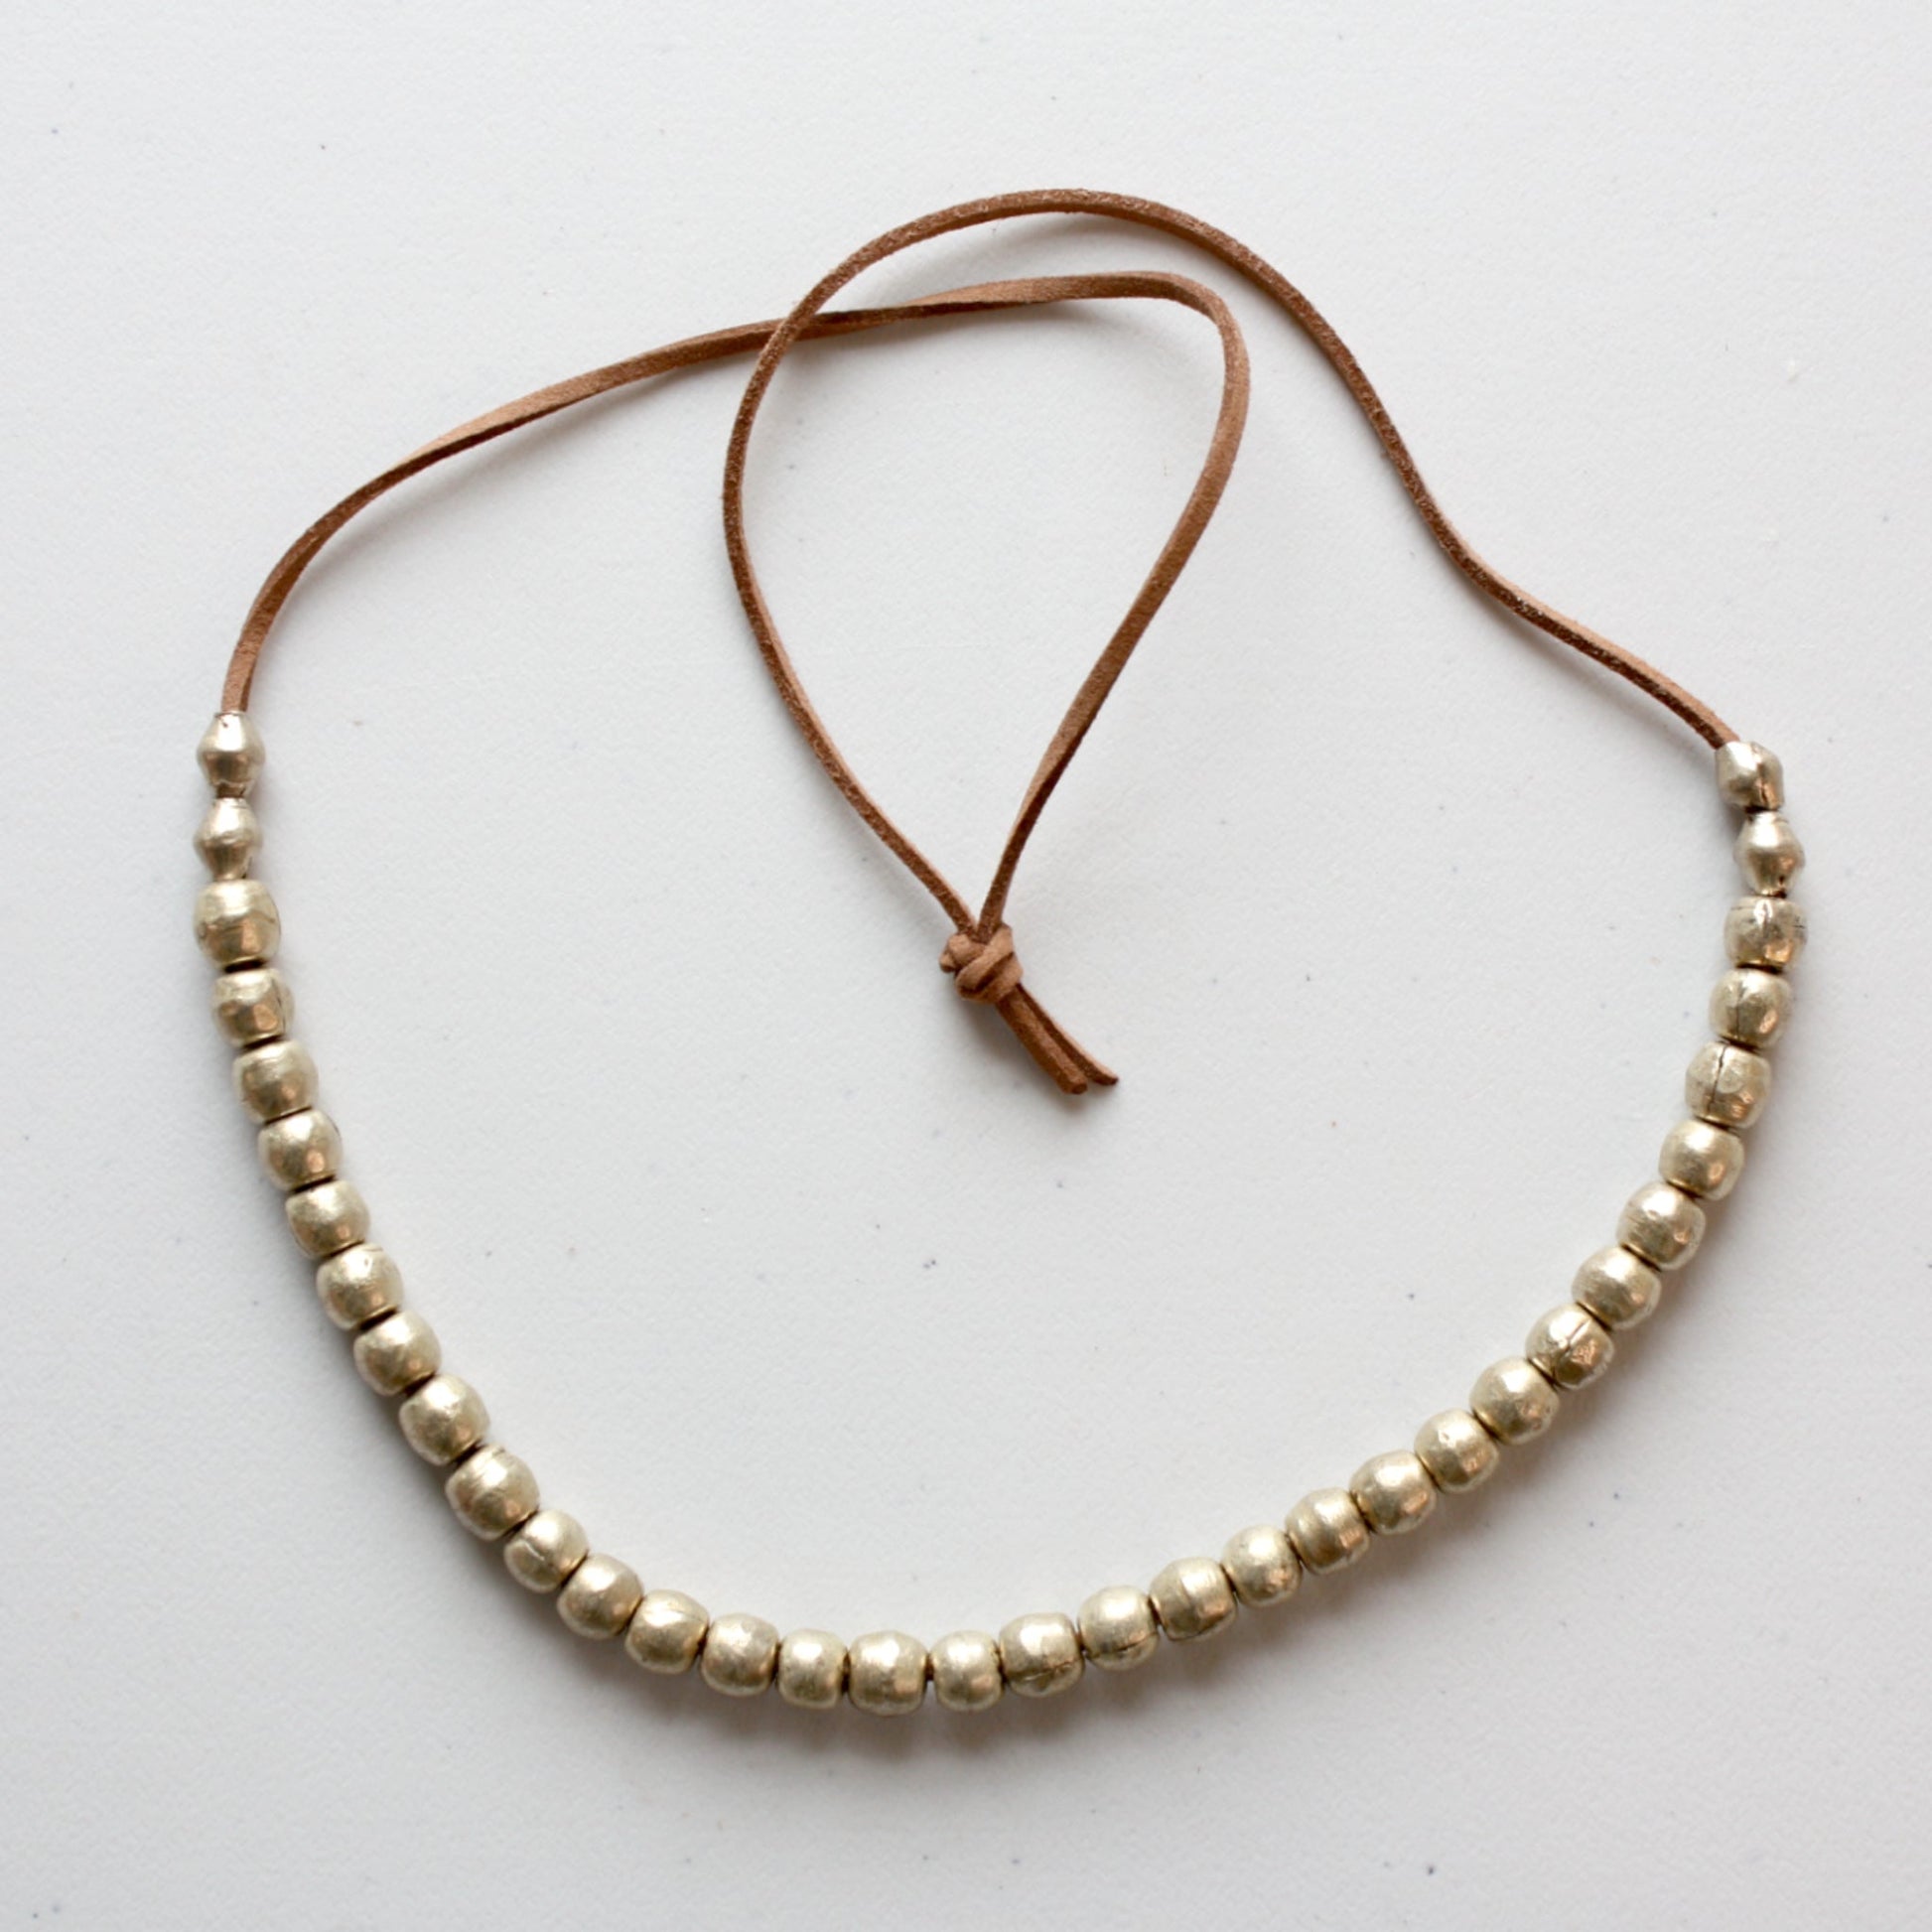 Gold Bead Boho Necklace with Vegan Suede - Made in the USA